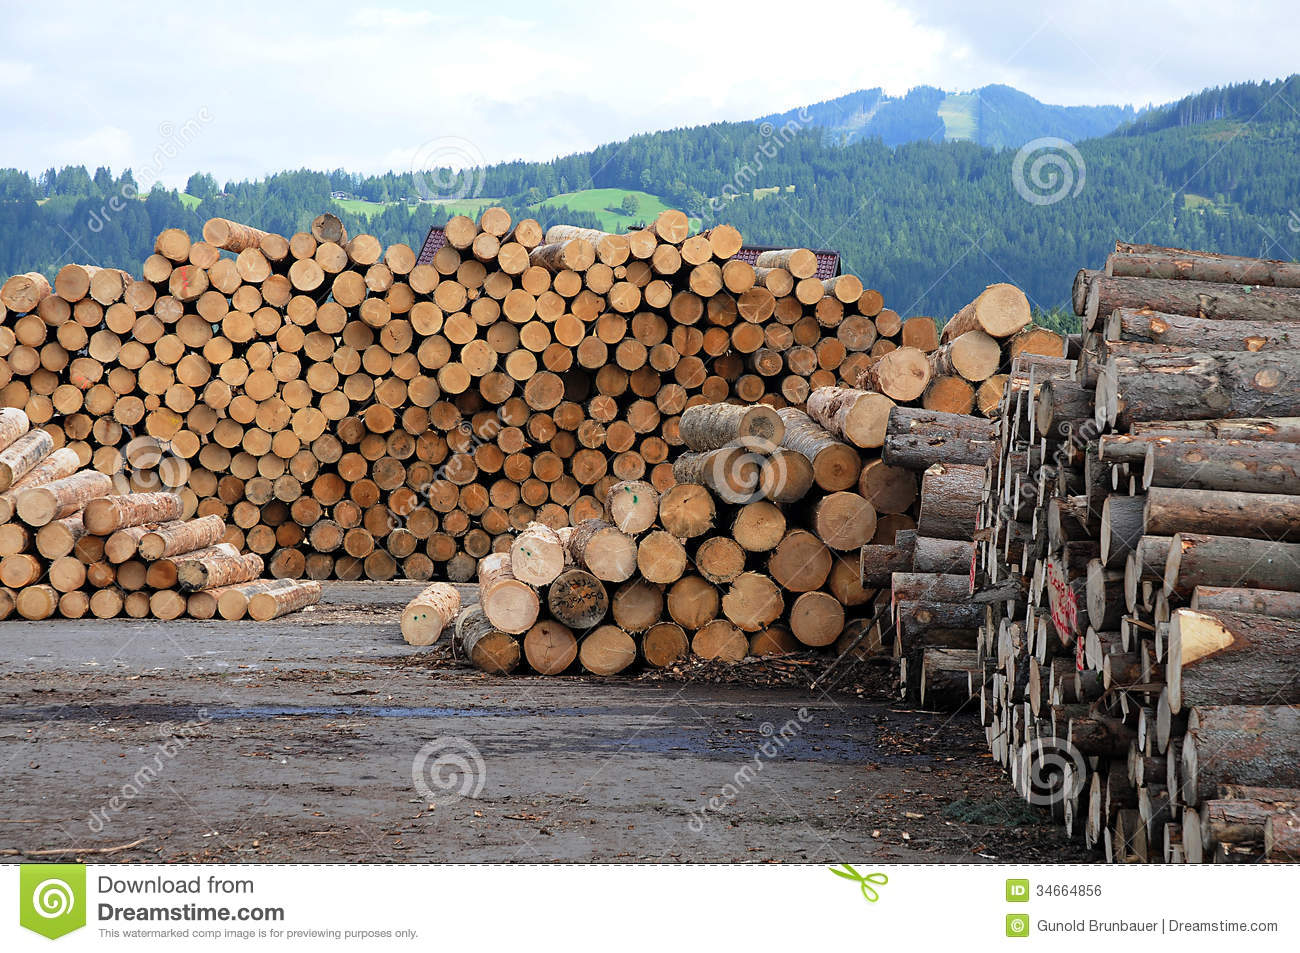 Pile Of Cut Lumber Wood In Front Of The Mountains In Austria